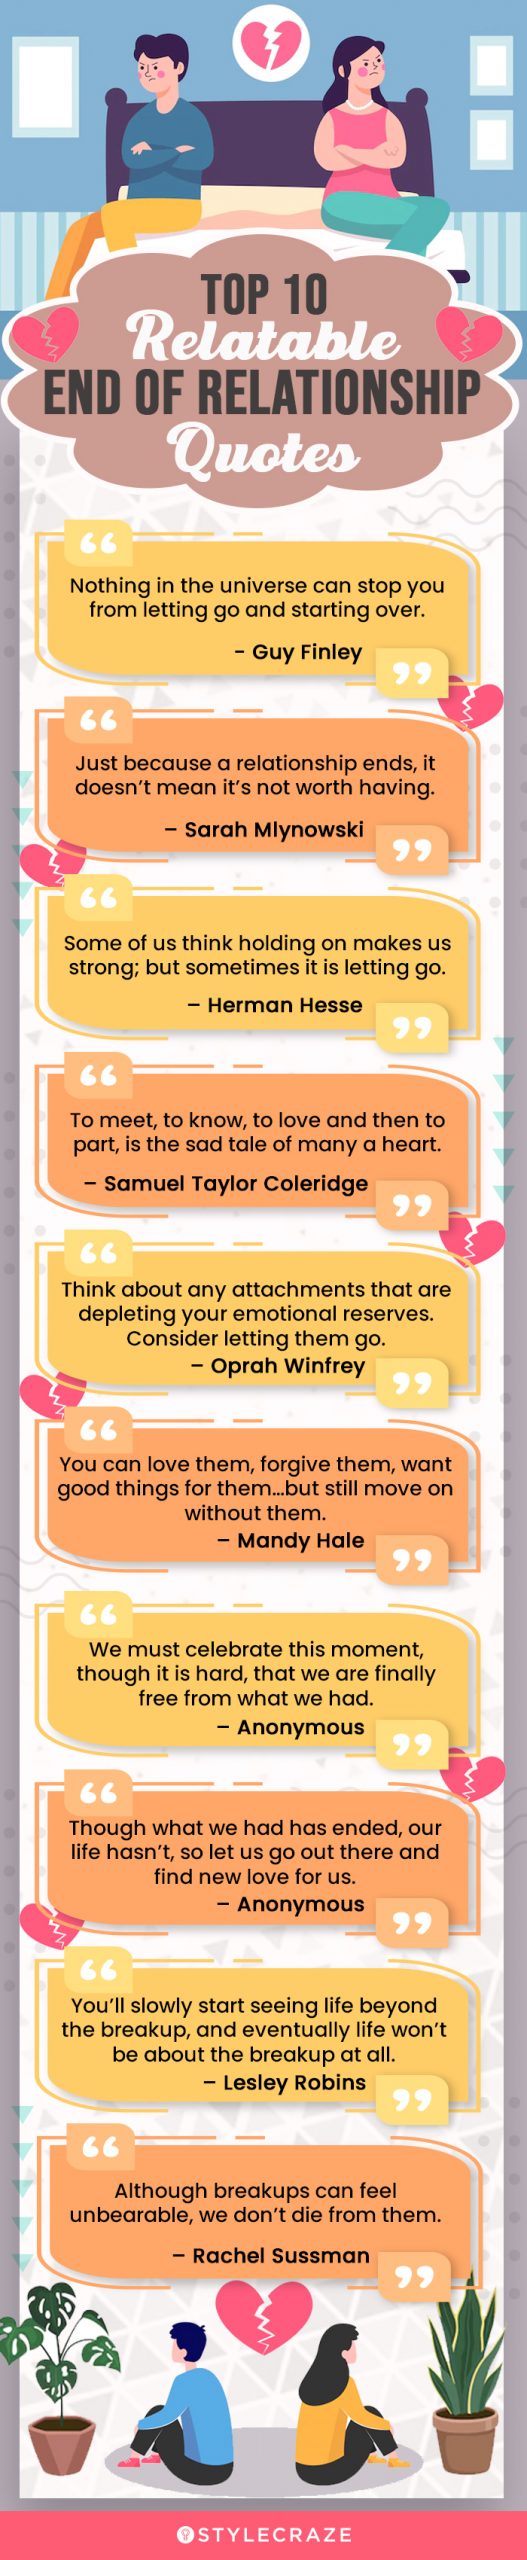 top 10relatable end of relationship quotes [infographic]